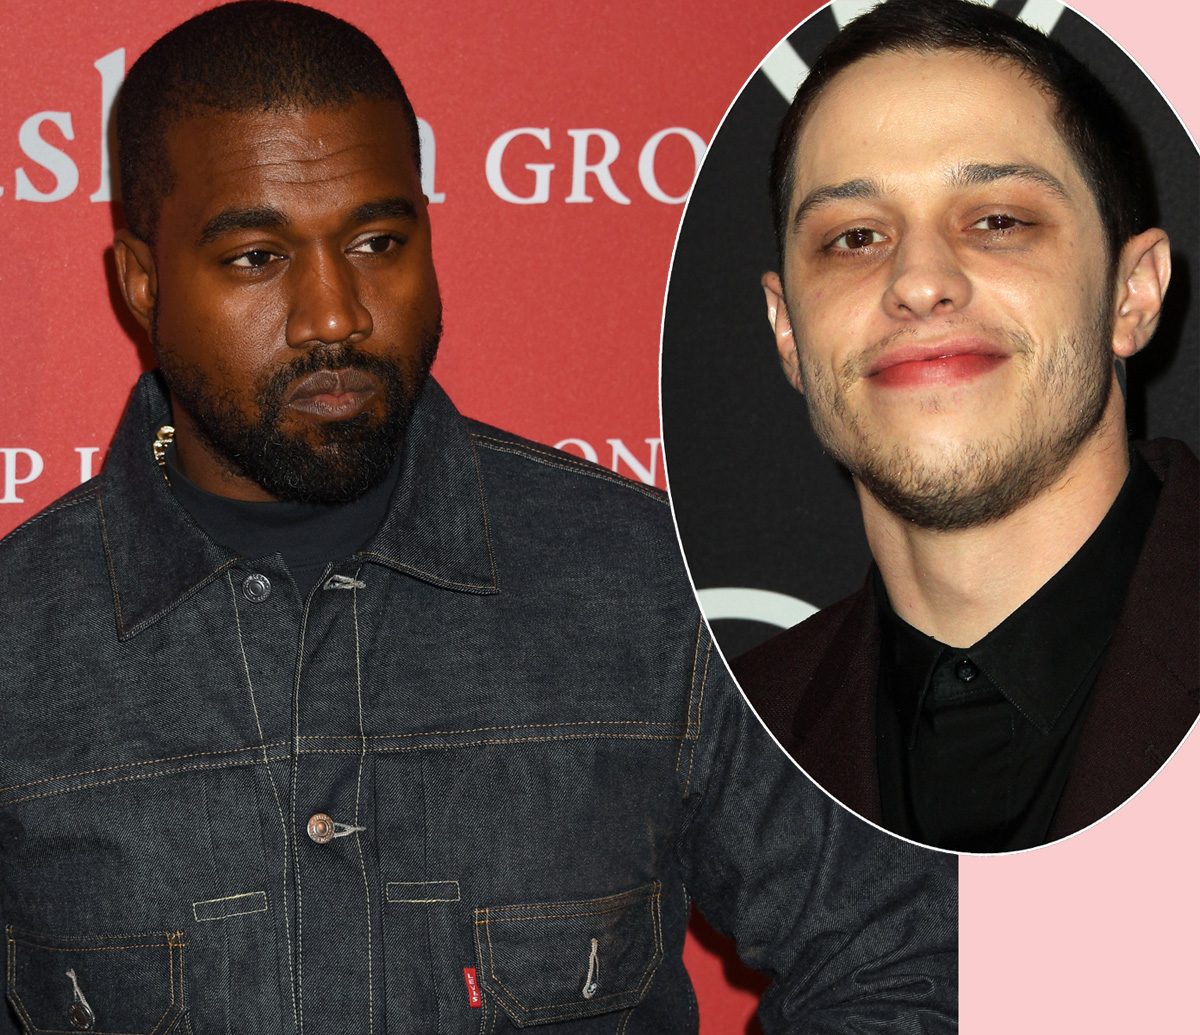 #Pete Davidson Currently In Trauma Therapy ‘In Large Part’ Due To Kanye West’s Threatening Social Media Posts